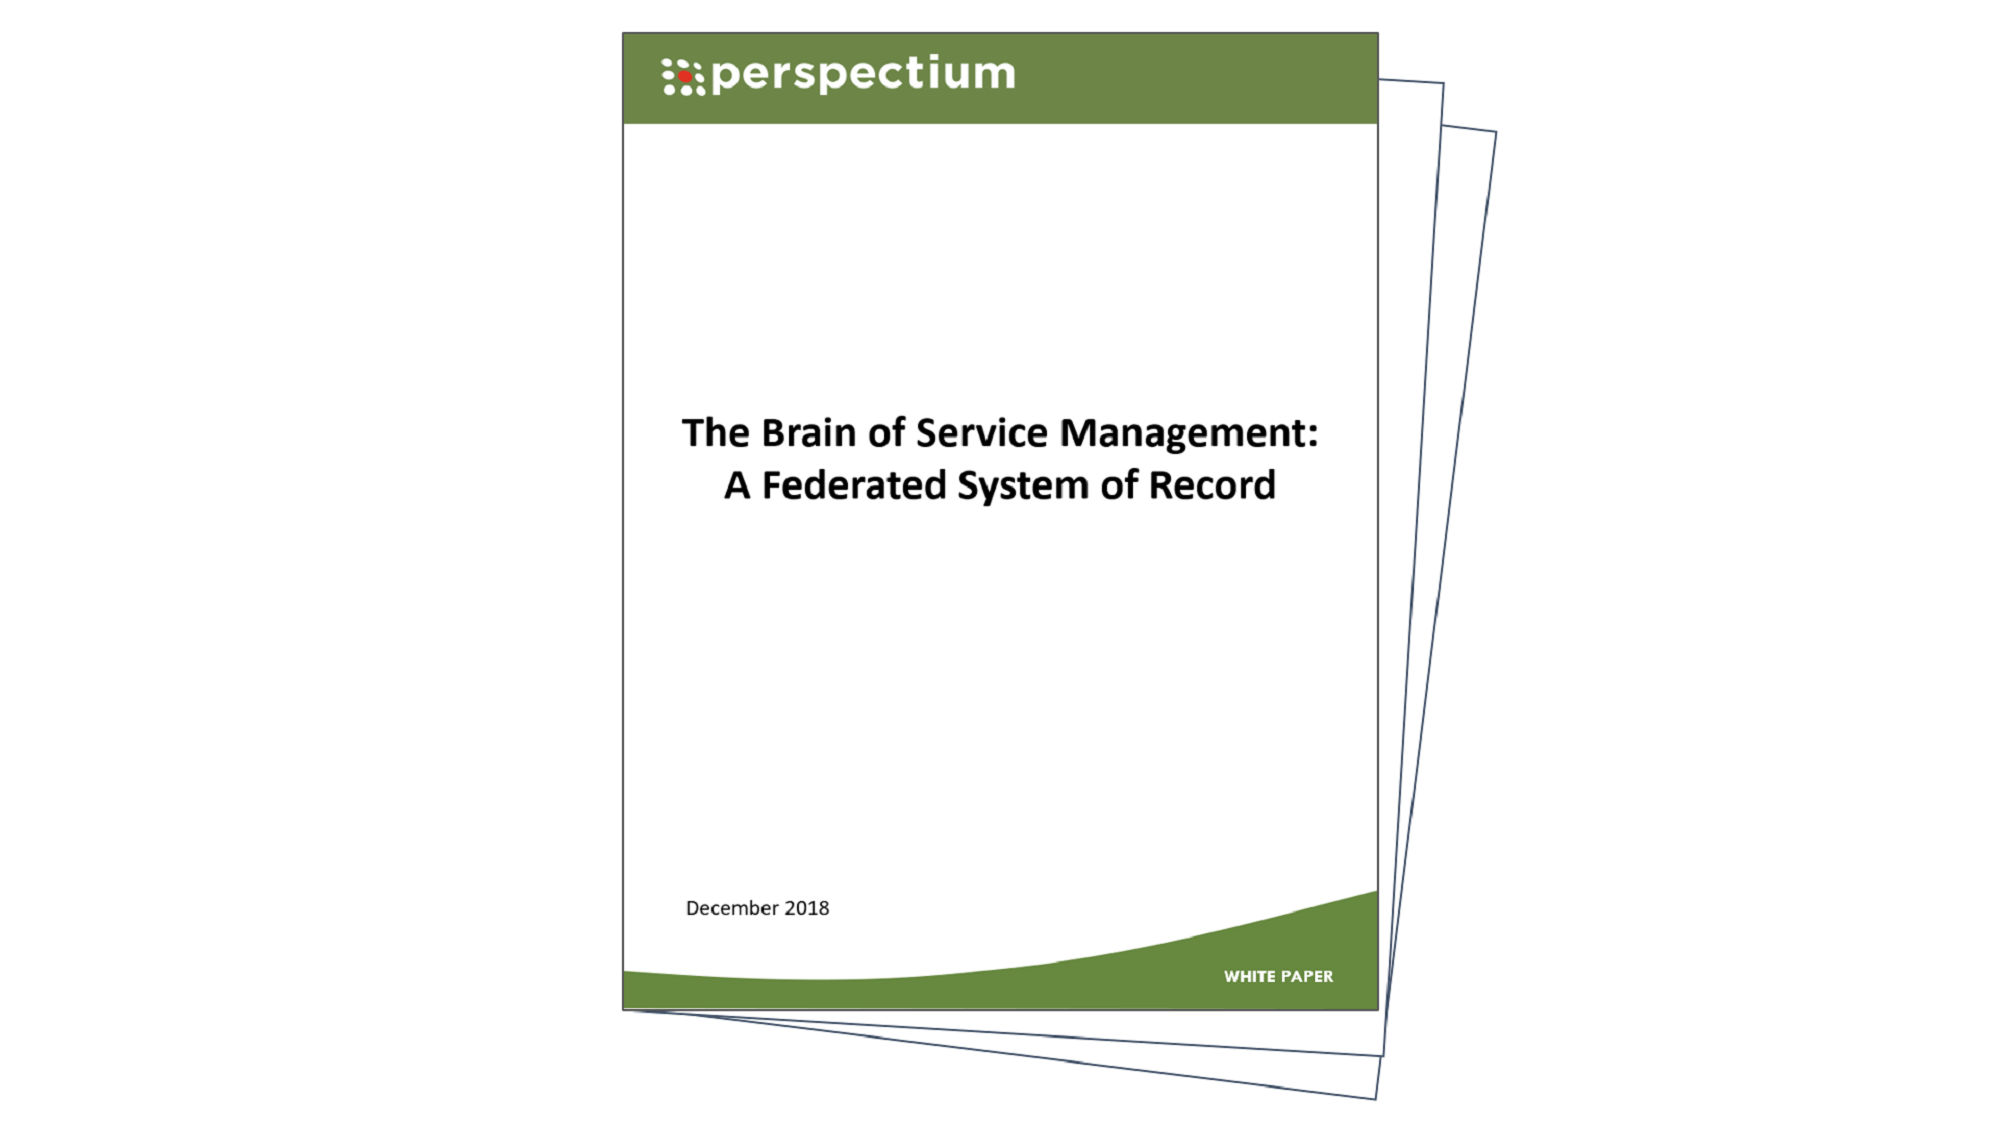 The Brain of Service Management: A Federated System of Record